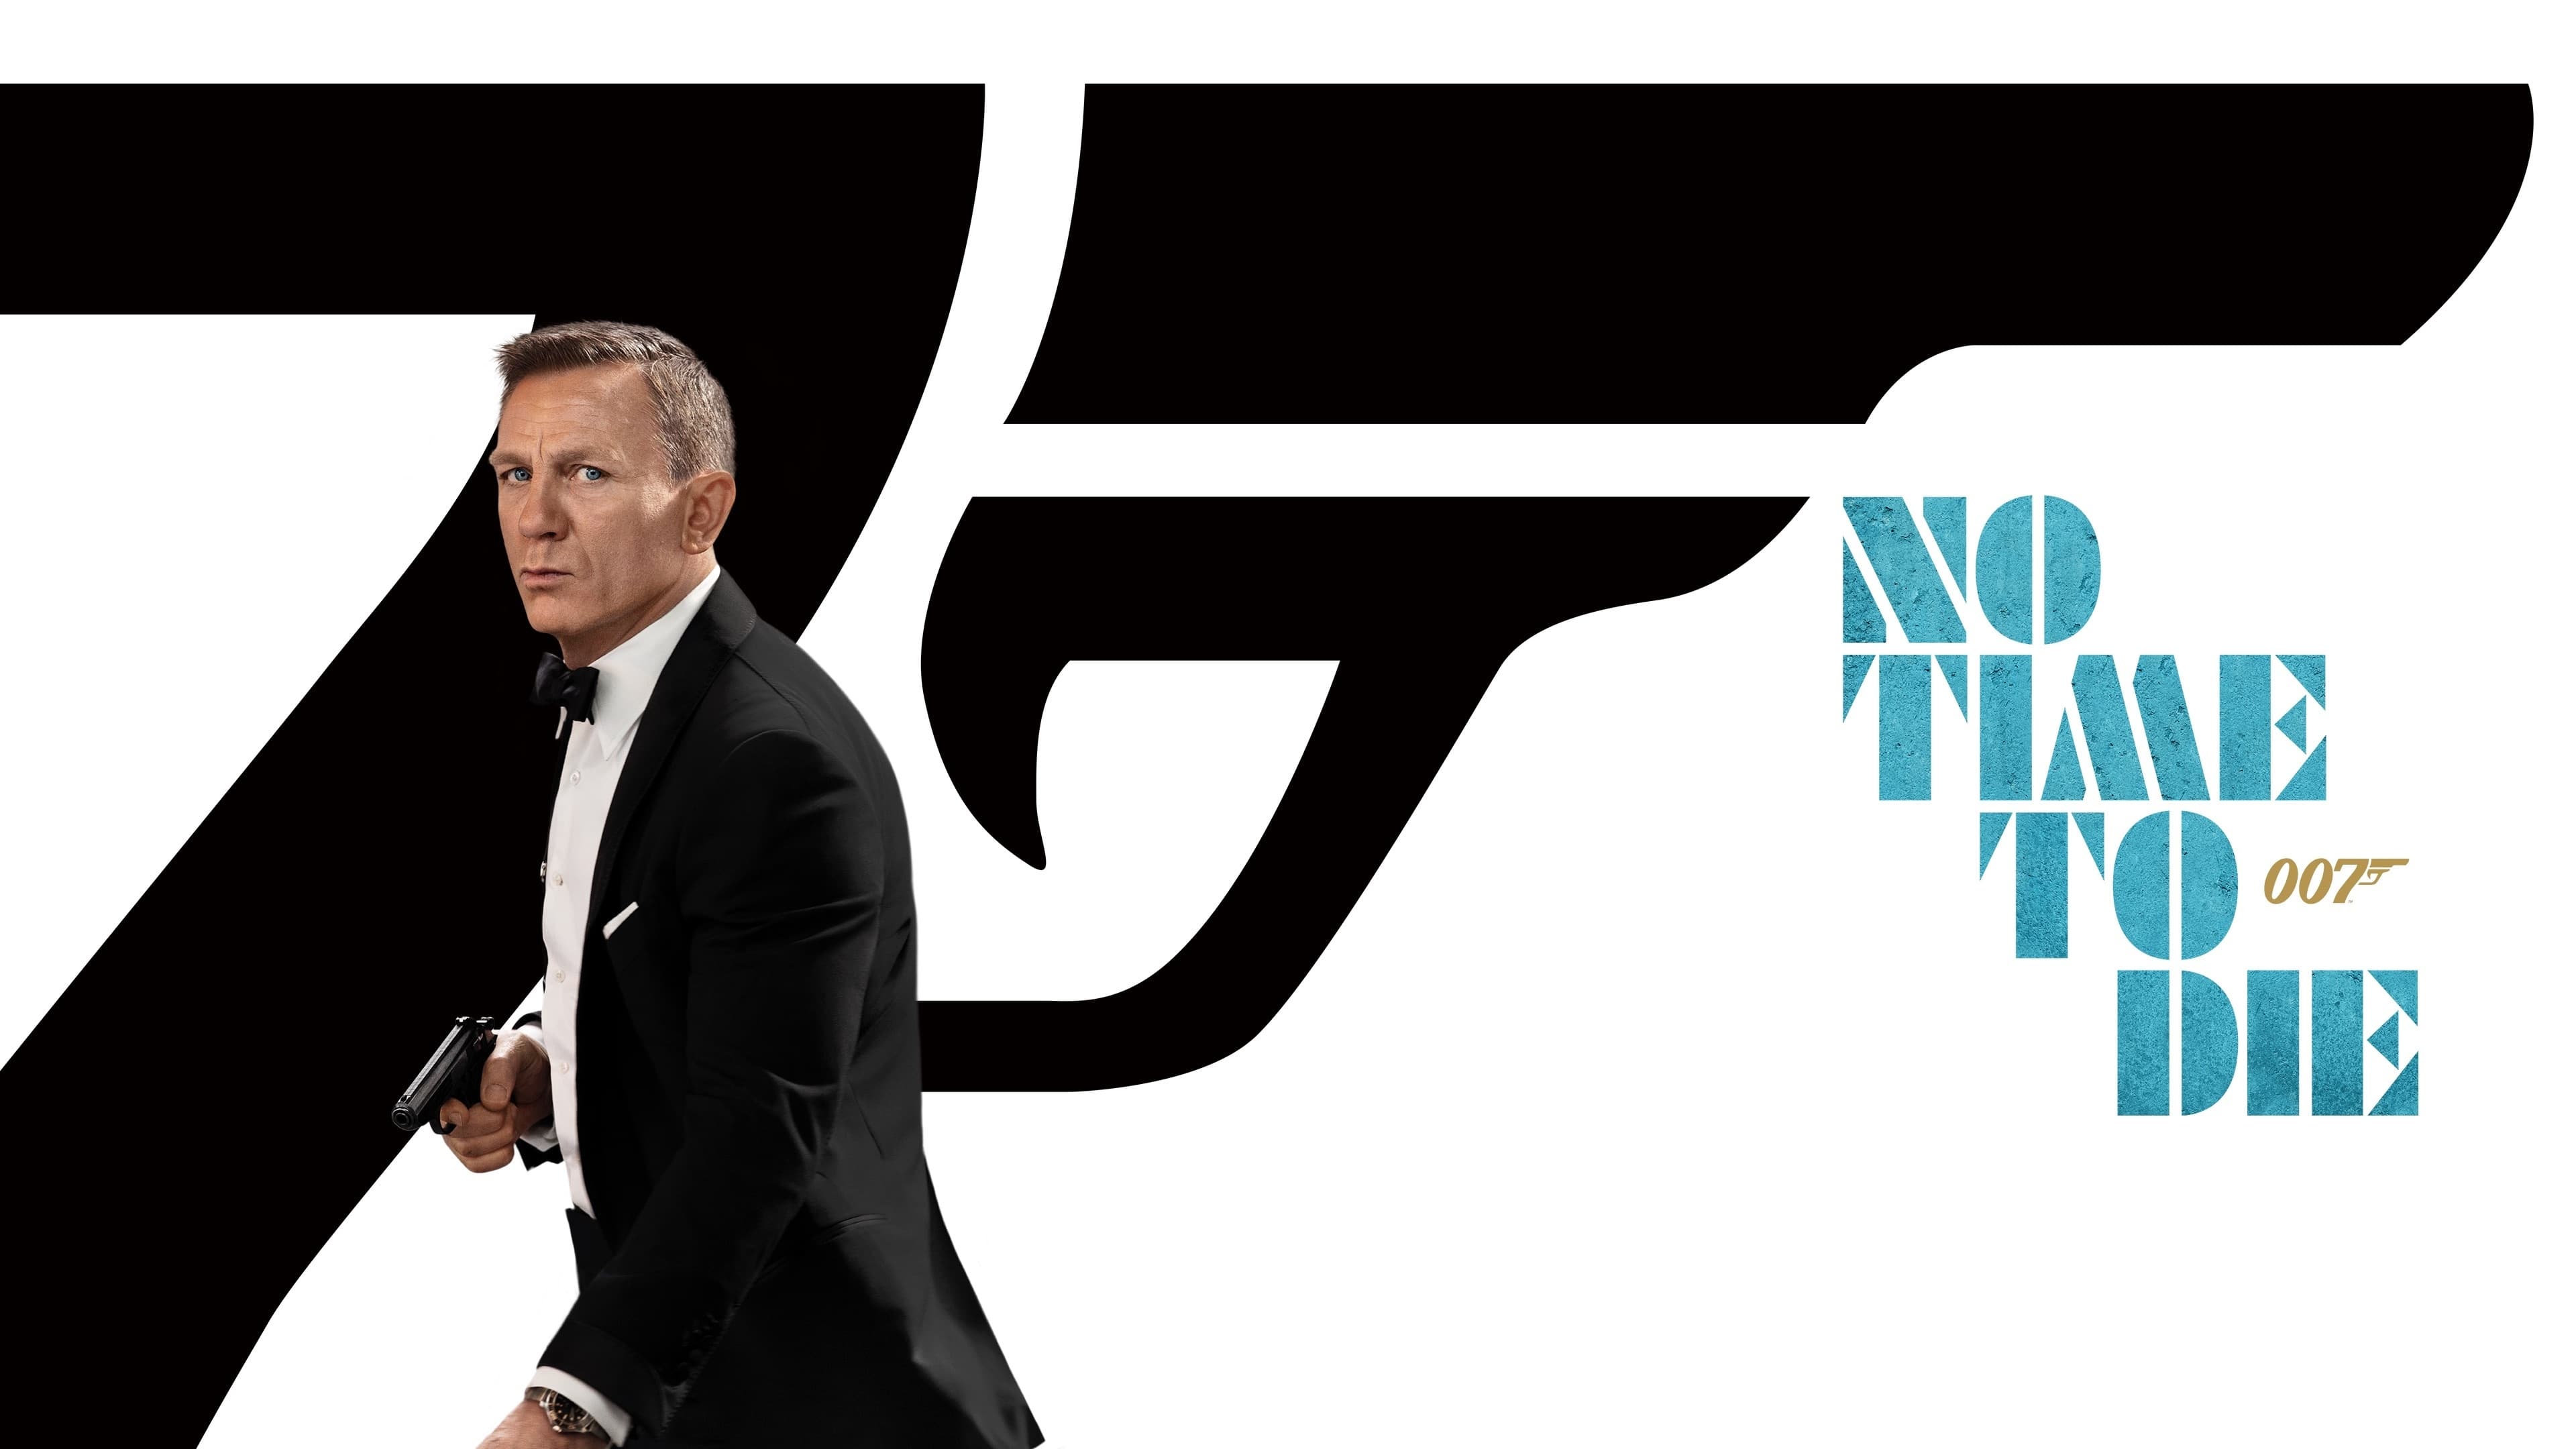 007 No time to die